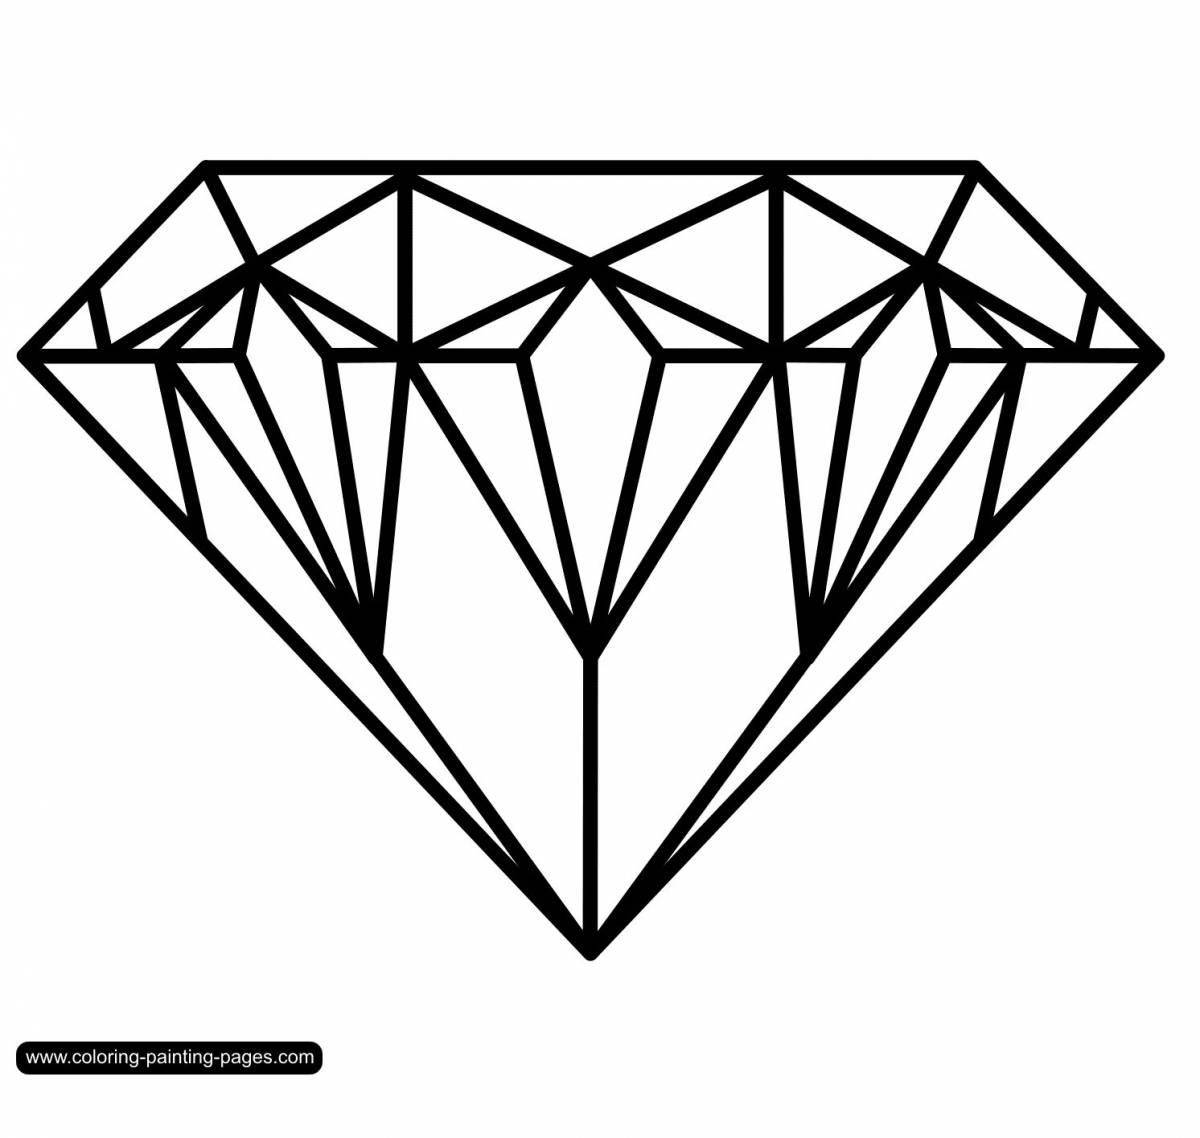 Awesome diamond coloring page for kids